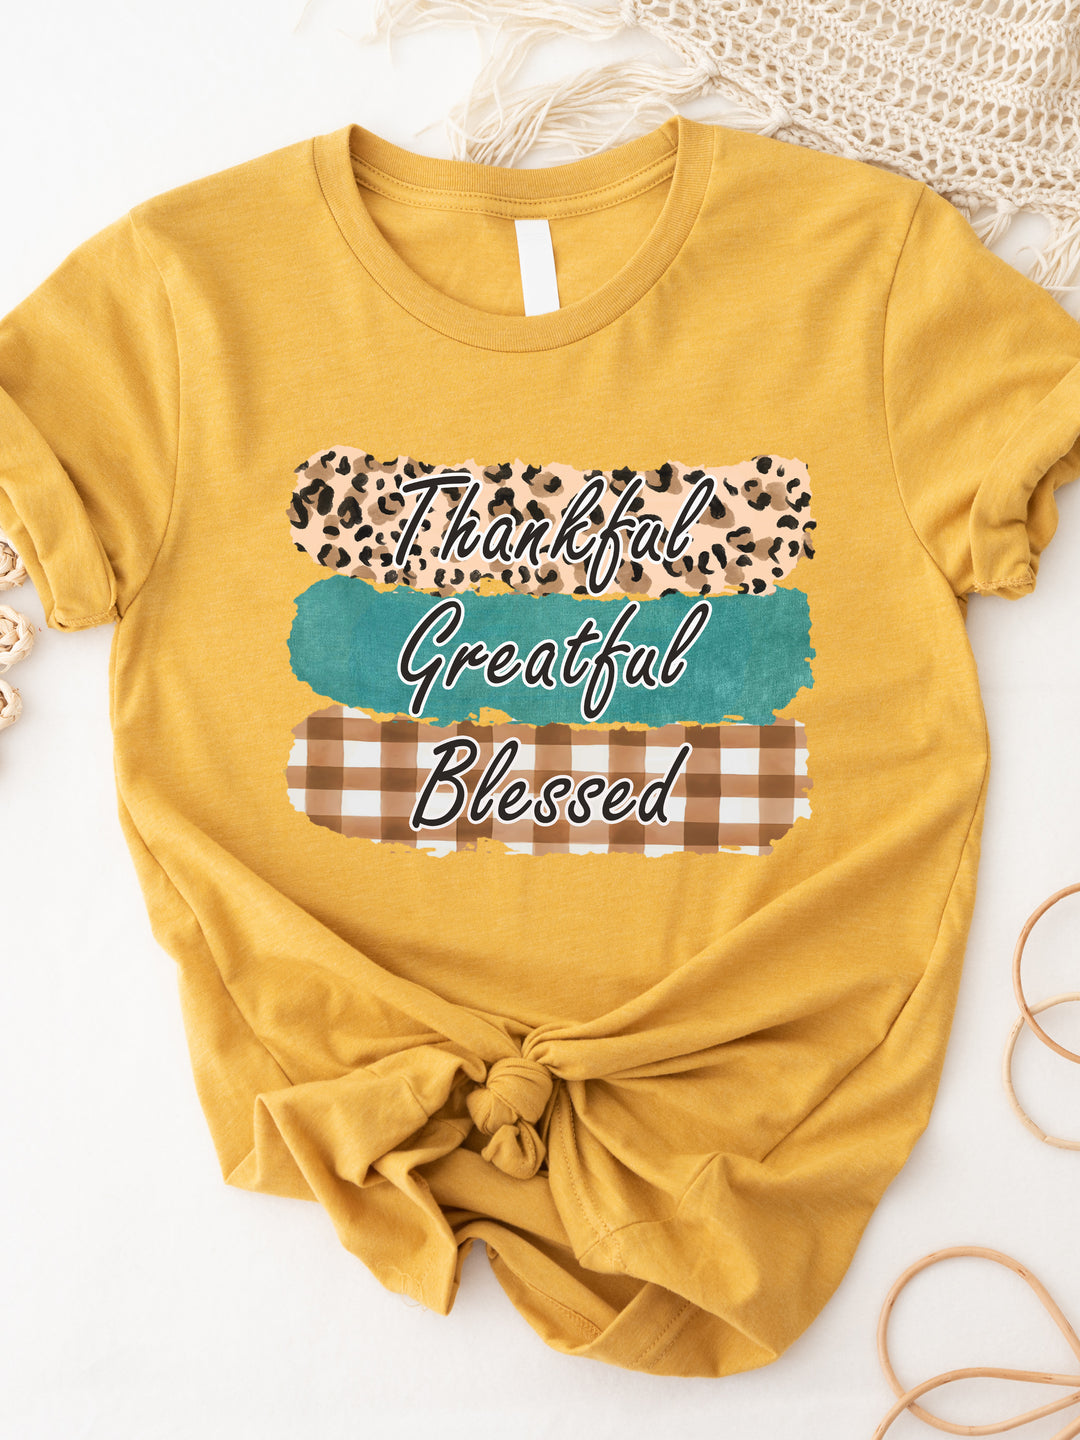 Thankful Grateful Blessed - Graphic Tee